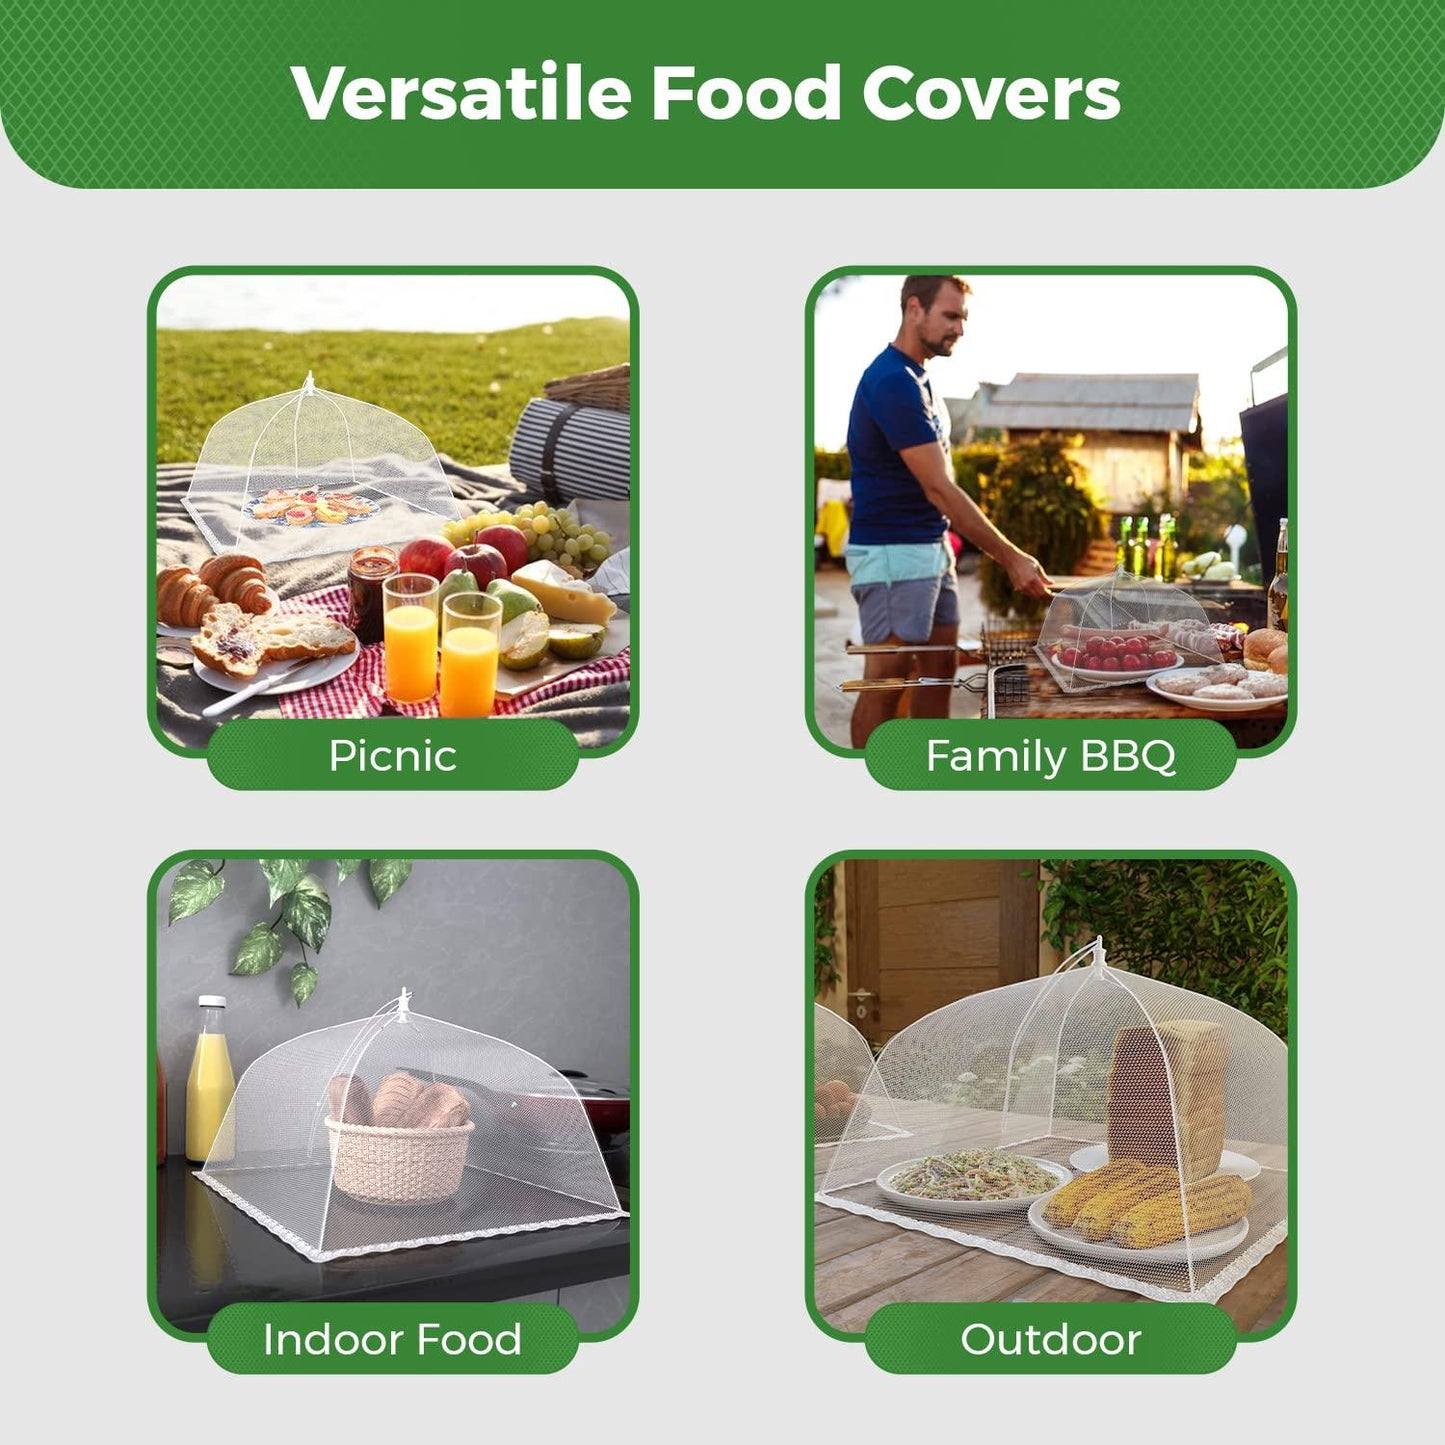 Simply Genius (6 pack) Large and Tall 17x17 Pop-Up Mesh Food Covers Tent Umbrella for Outdoors, Screen Tents, Parties Picnics, BBQs, Reusable and Collapsible Food Tents - CookCave